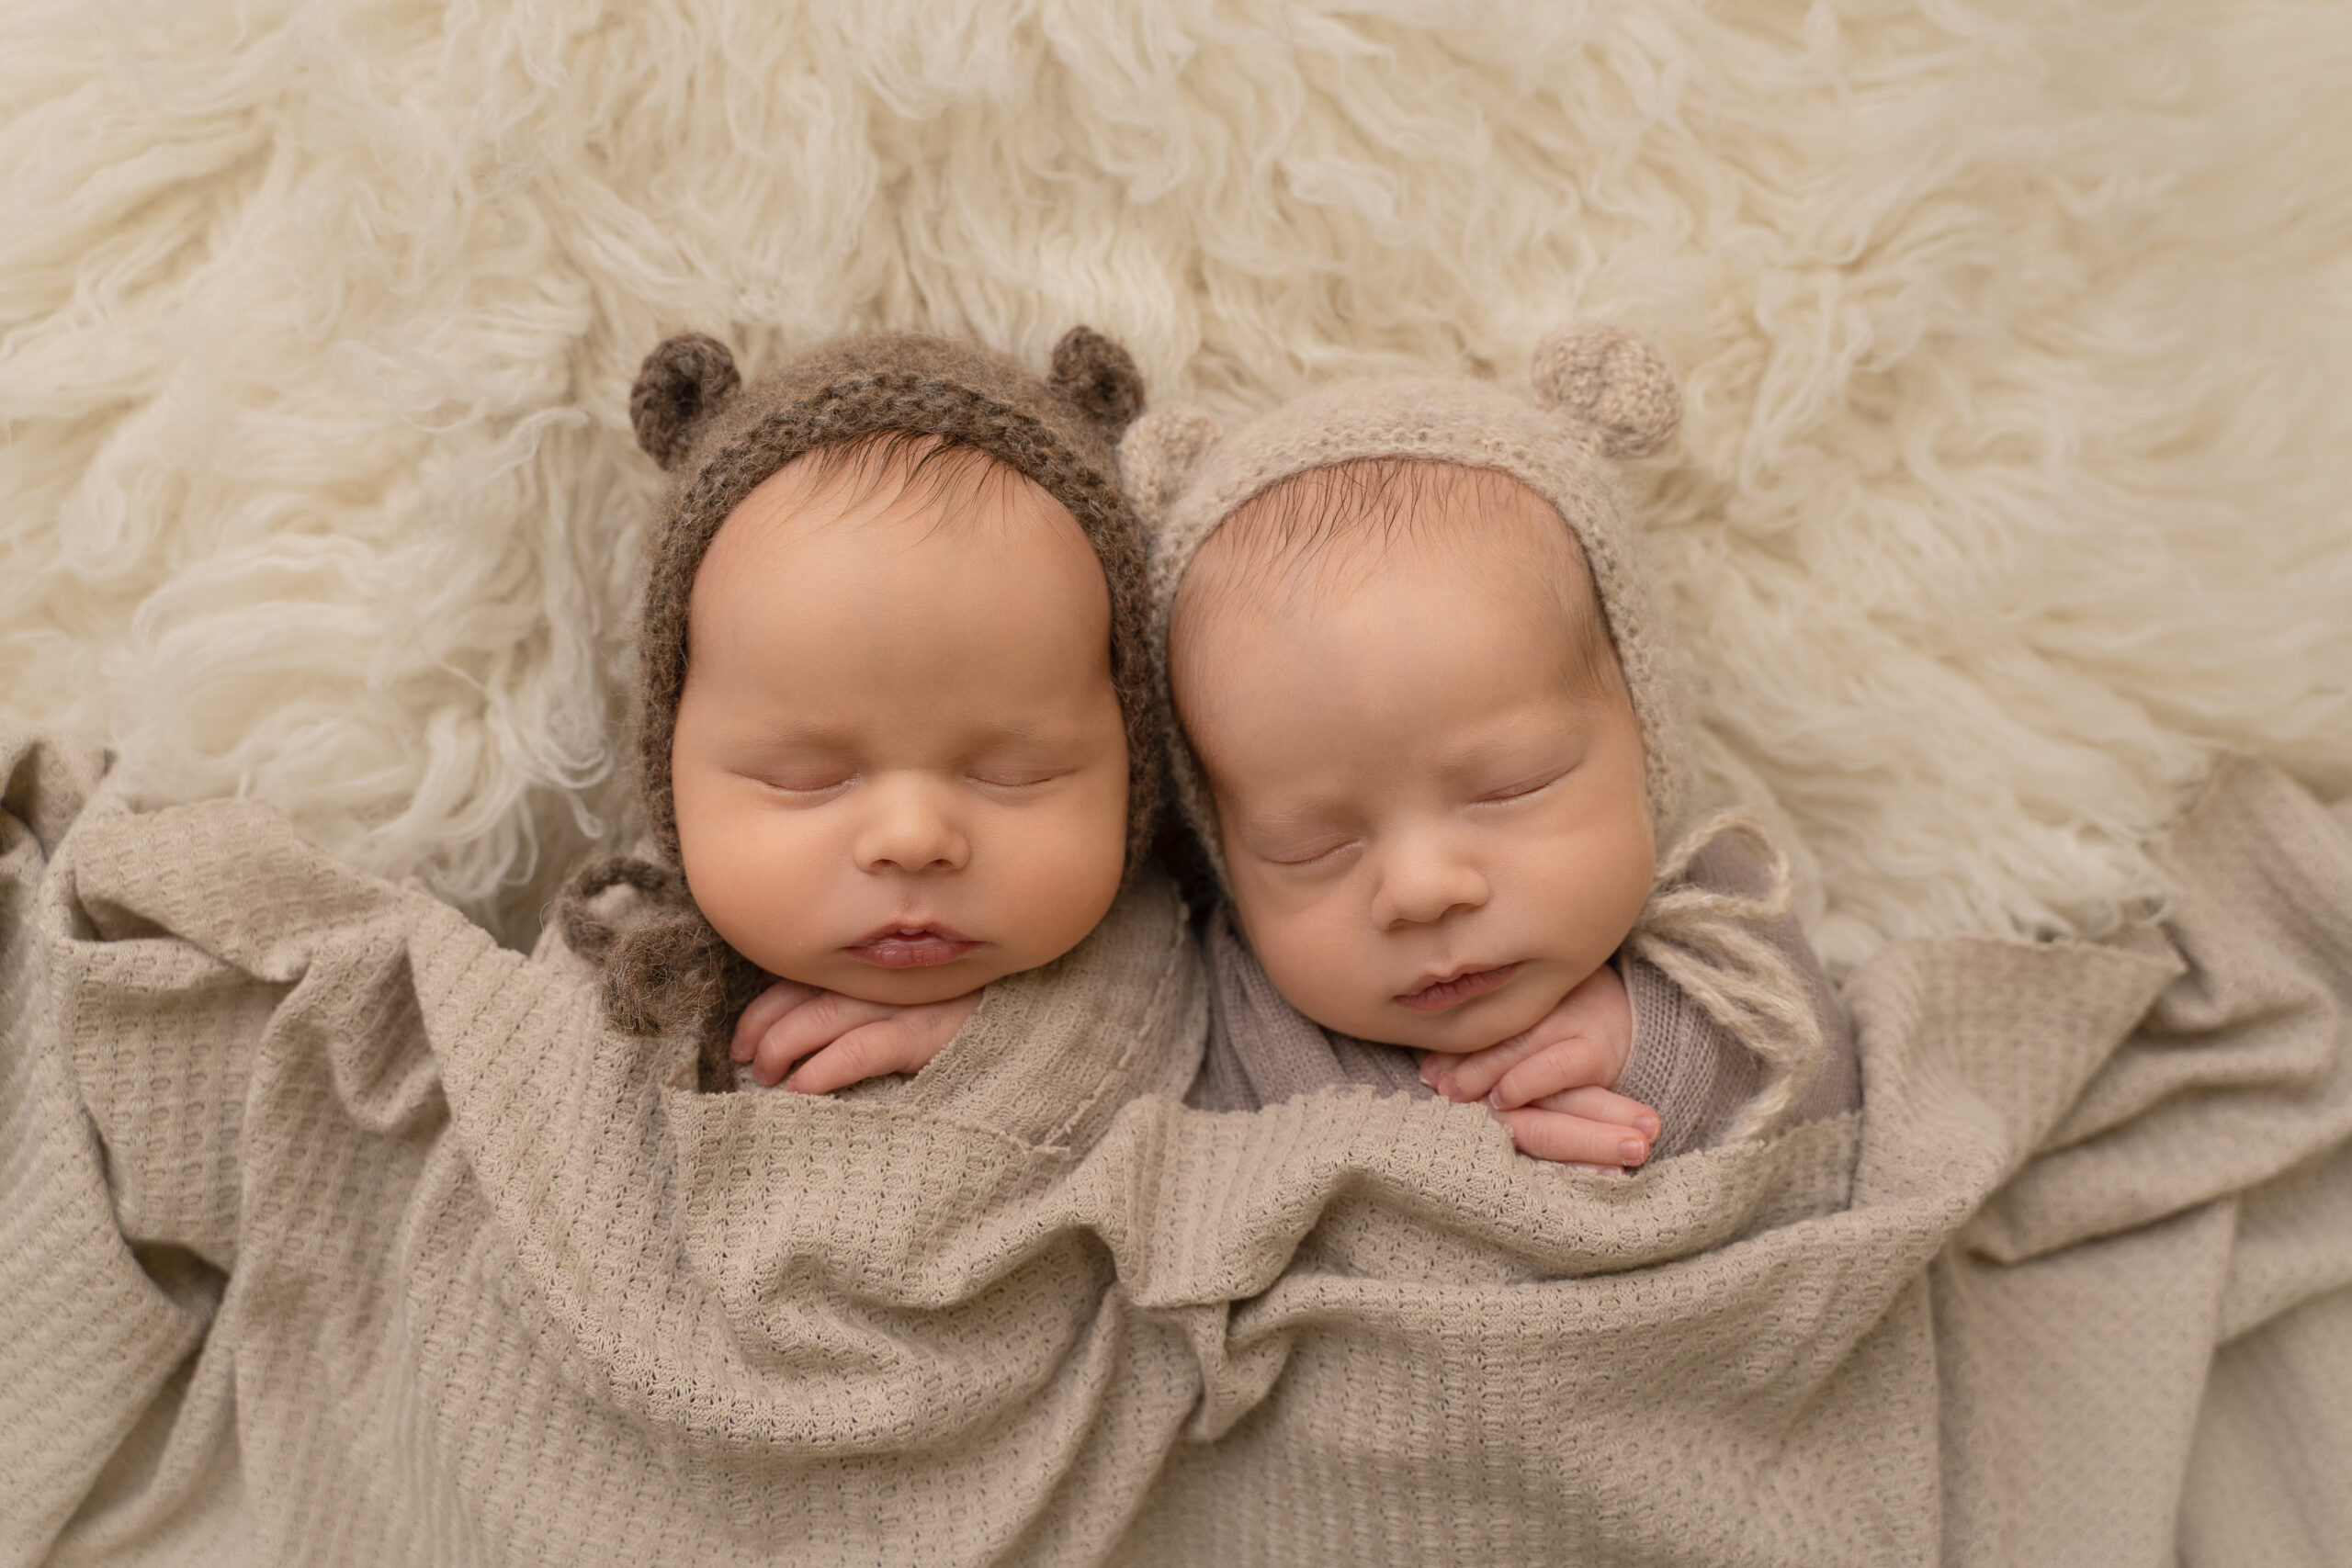 Top tips for parents expecting newborn twins